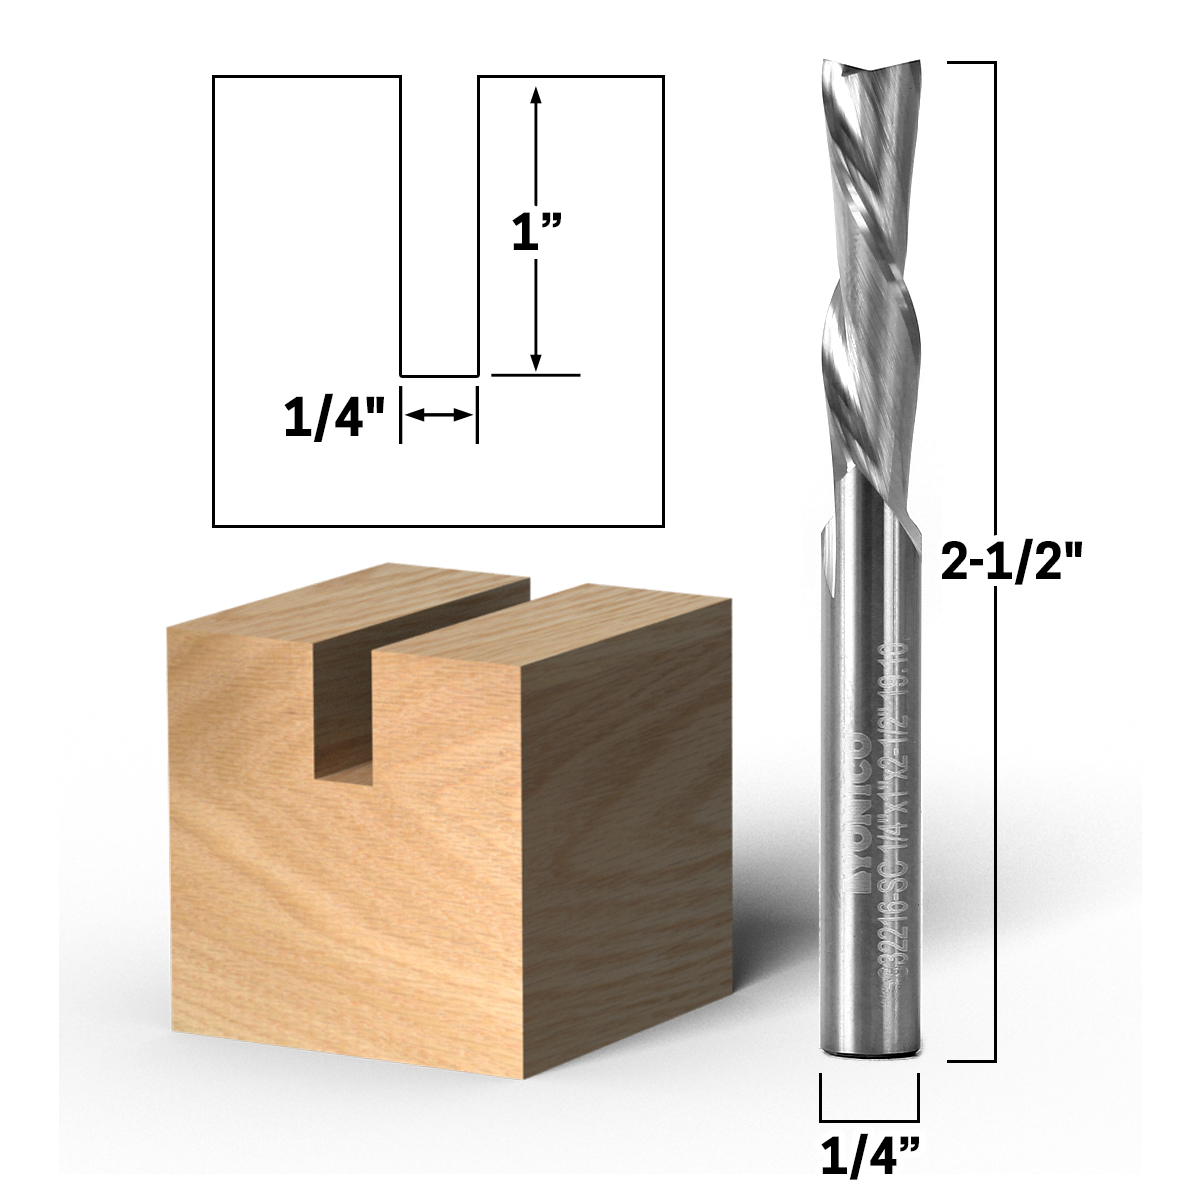 .1250 1/8" 2 FLUTE SGS CARBIDE ROUTER UPCUT WOOD AND PLASTIC 90001 1/4" SHANK